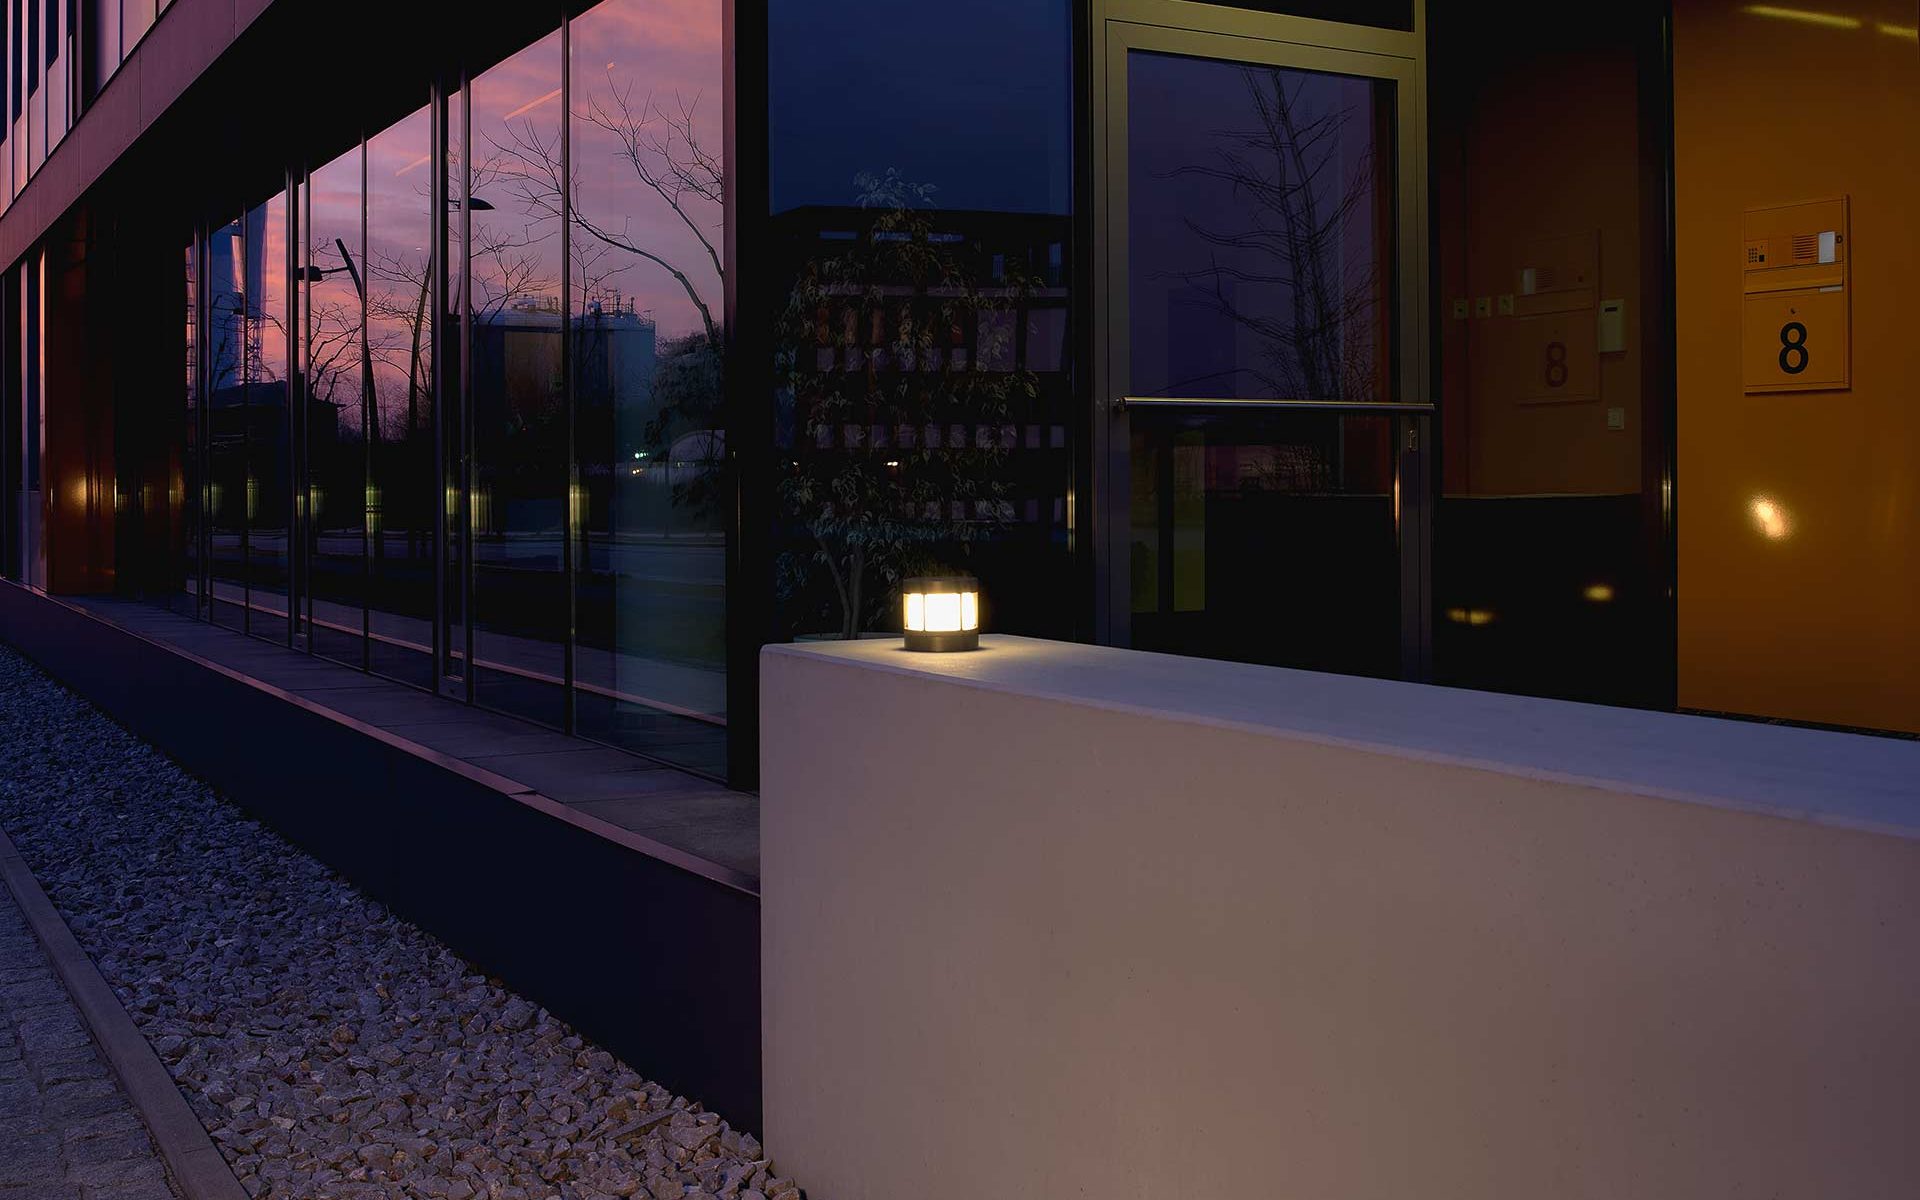 A small pedestal light provides picturesque light on a wall in front of a building complex.